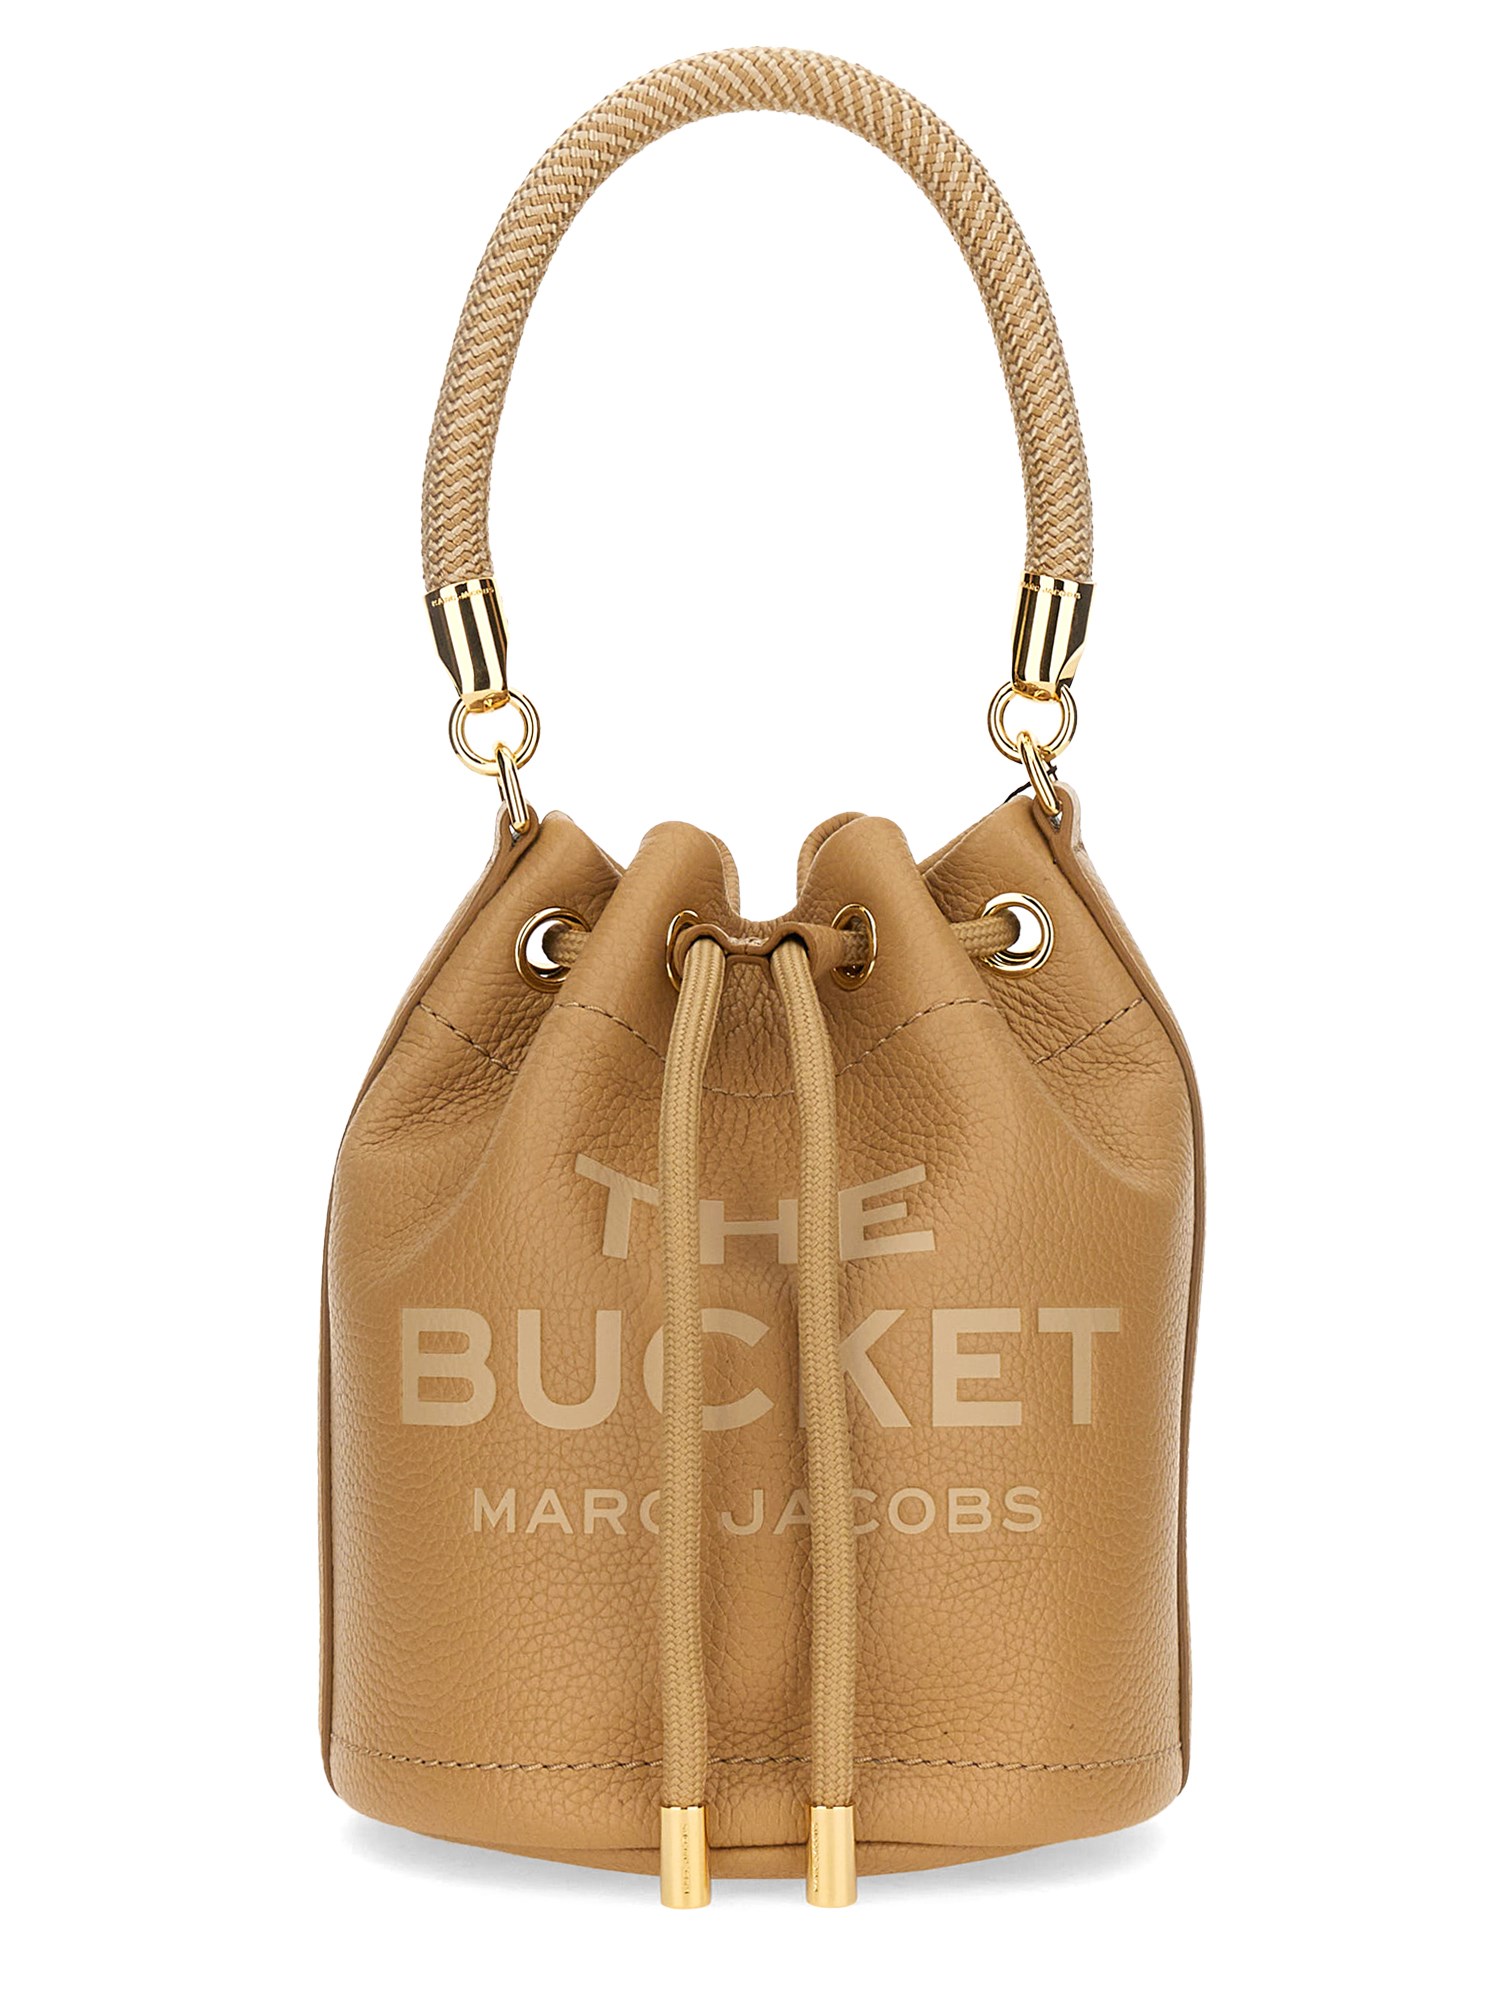 Marc Jacobs marc jacobs bag the bucket